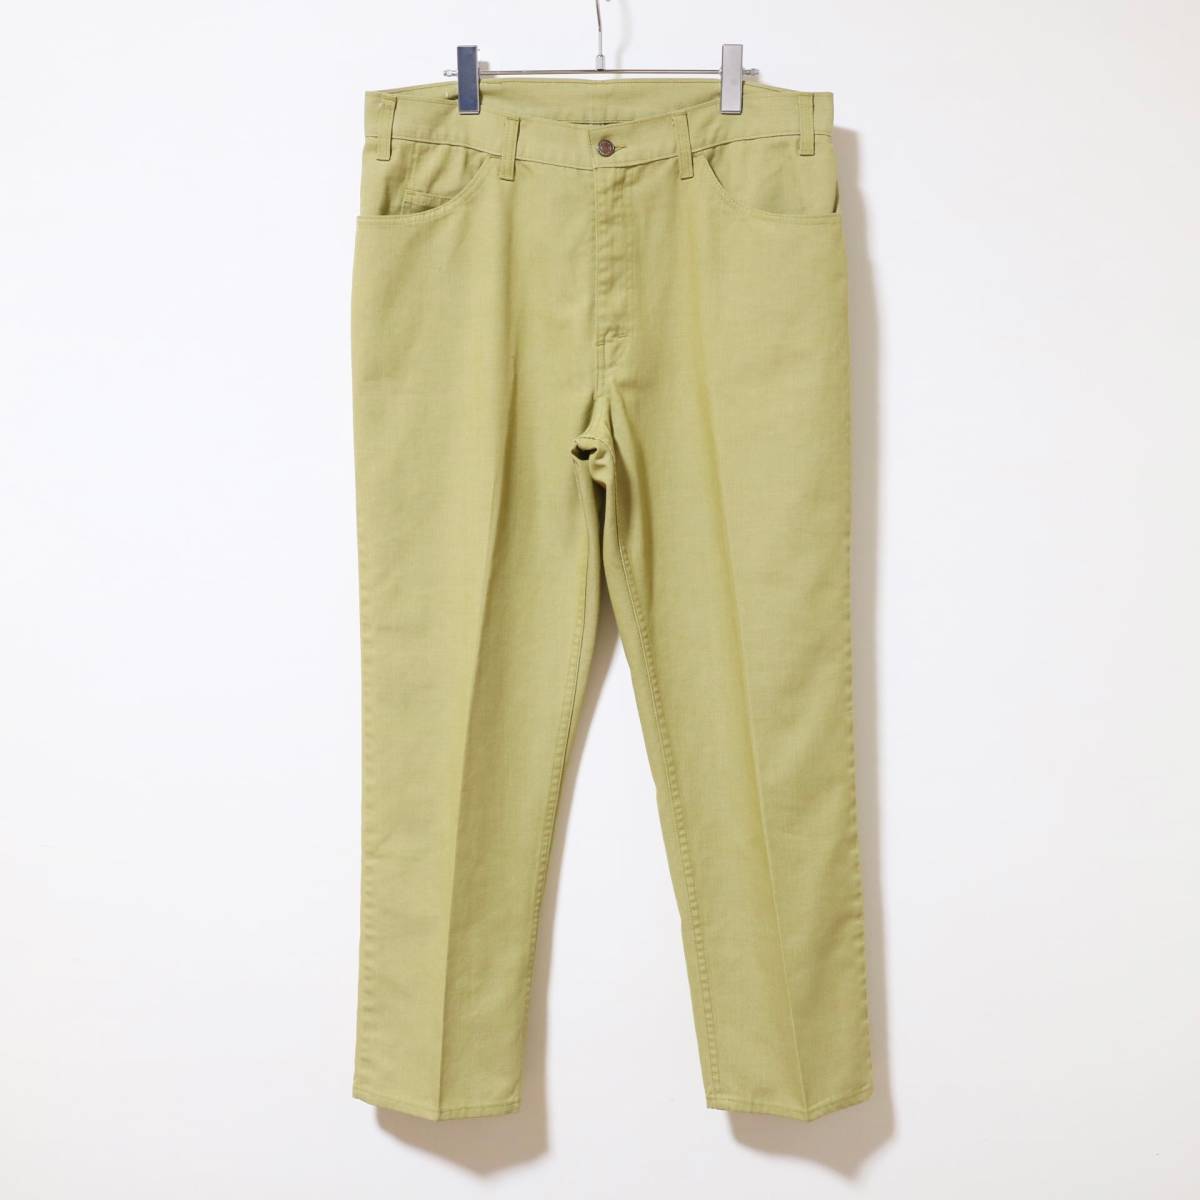 Levi´s / 60-70´s Vintage Tapered Pants STA-PREST / Made in USA